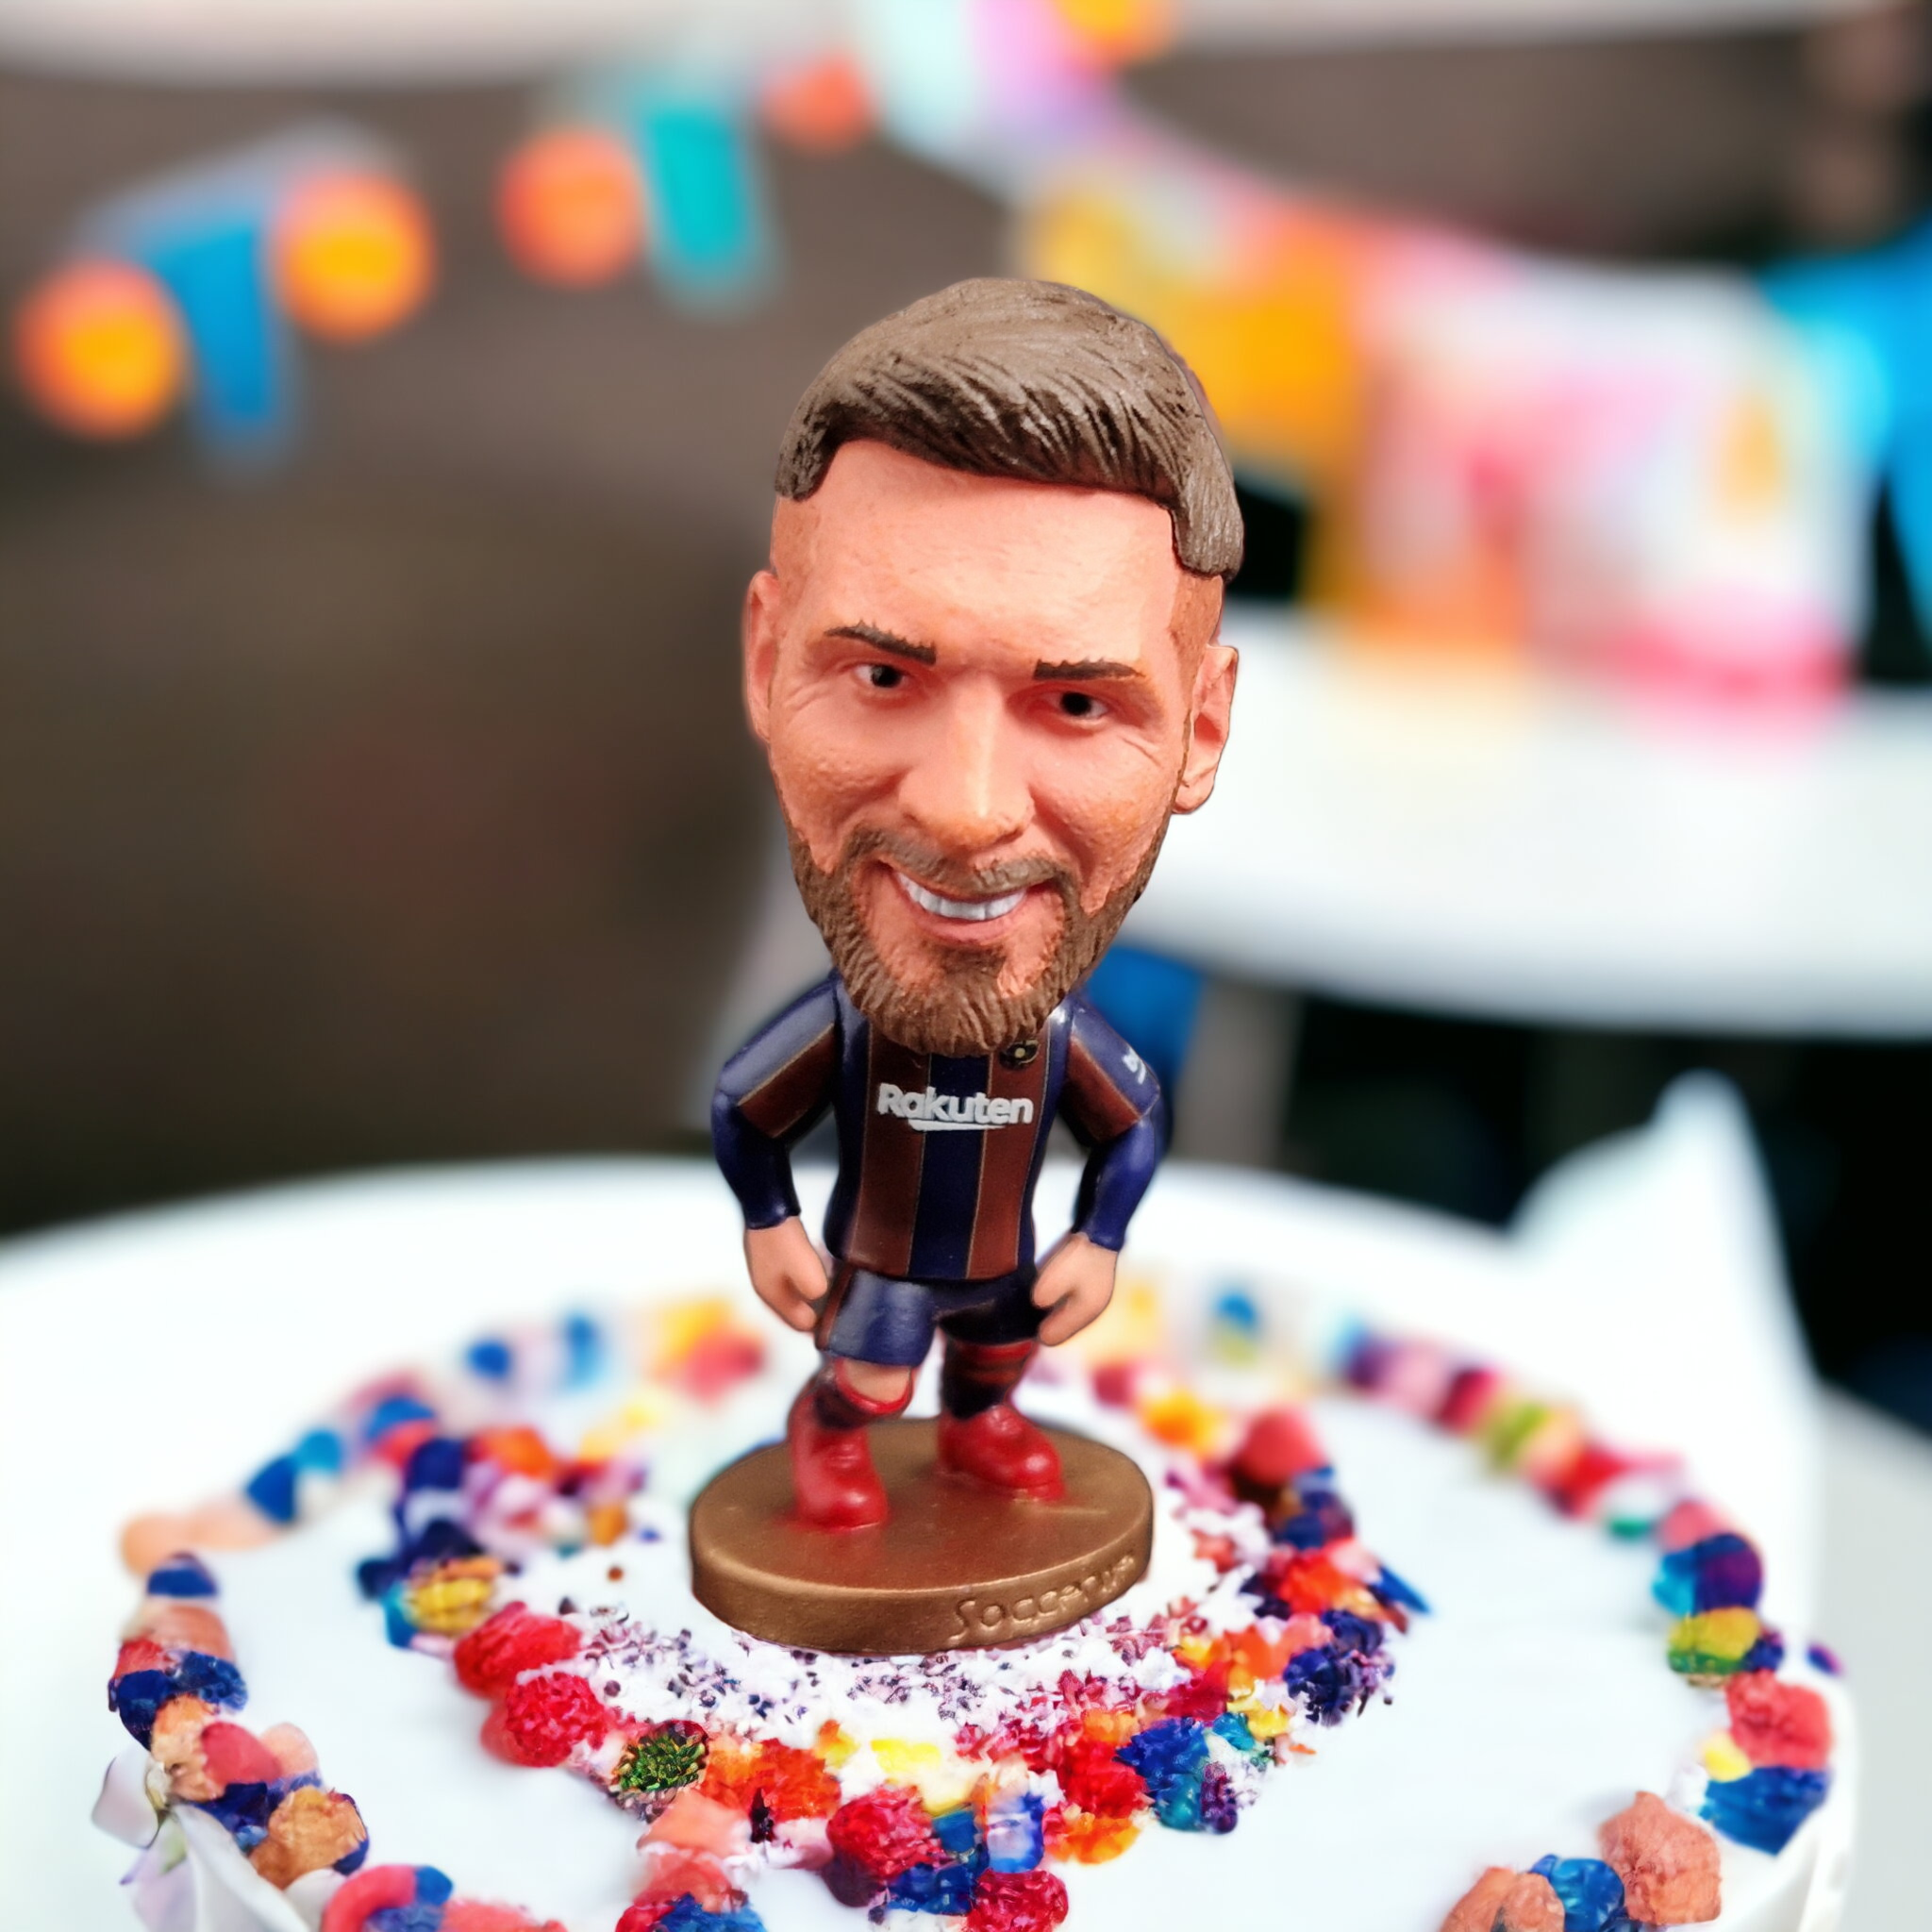 Amazon.com: Barcelona Soccer Club Personalized Cake Topper 1/2 11 x 17  Inches Birthday Cake Topper : Grocery & Gourmet Food